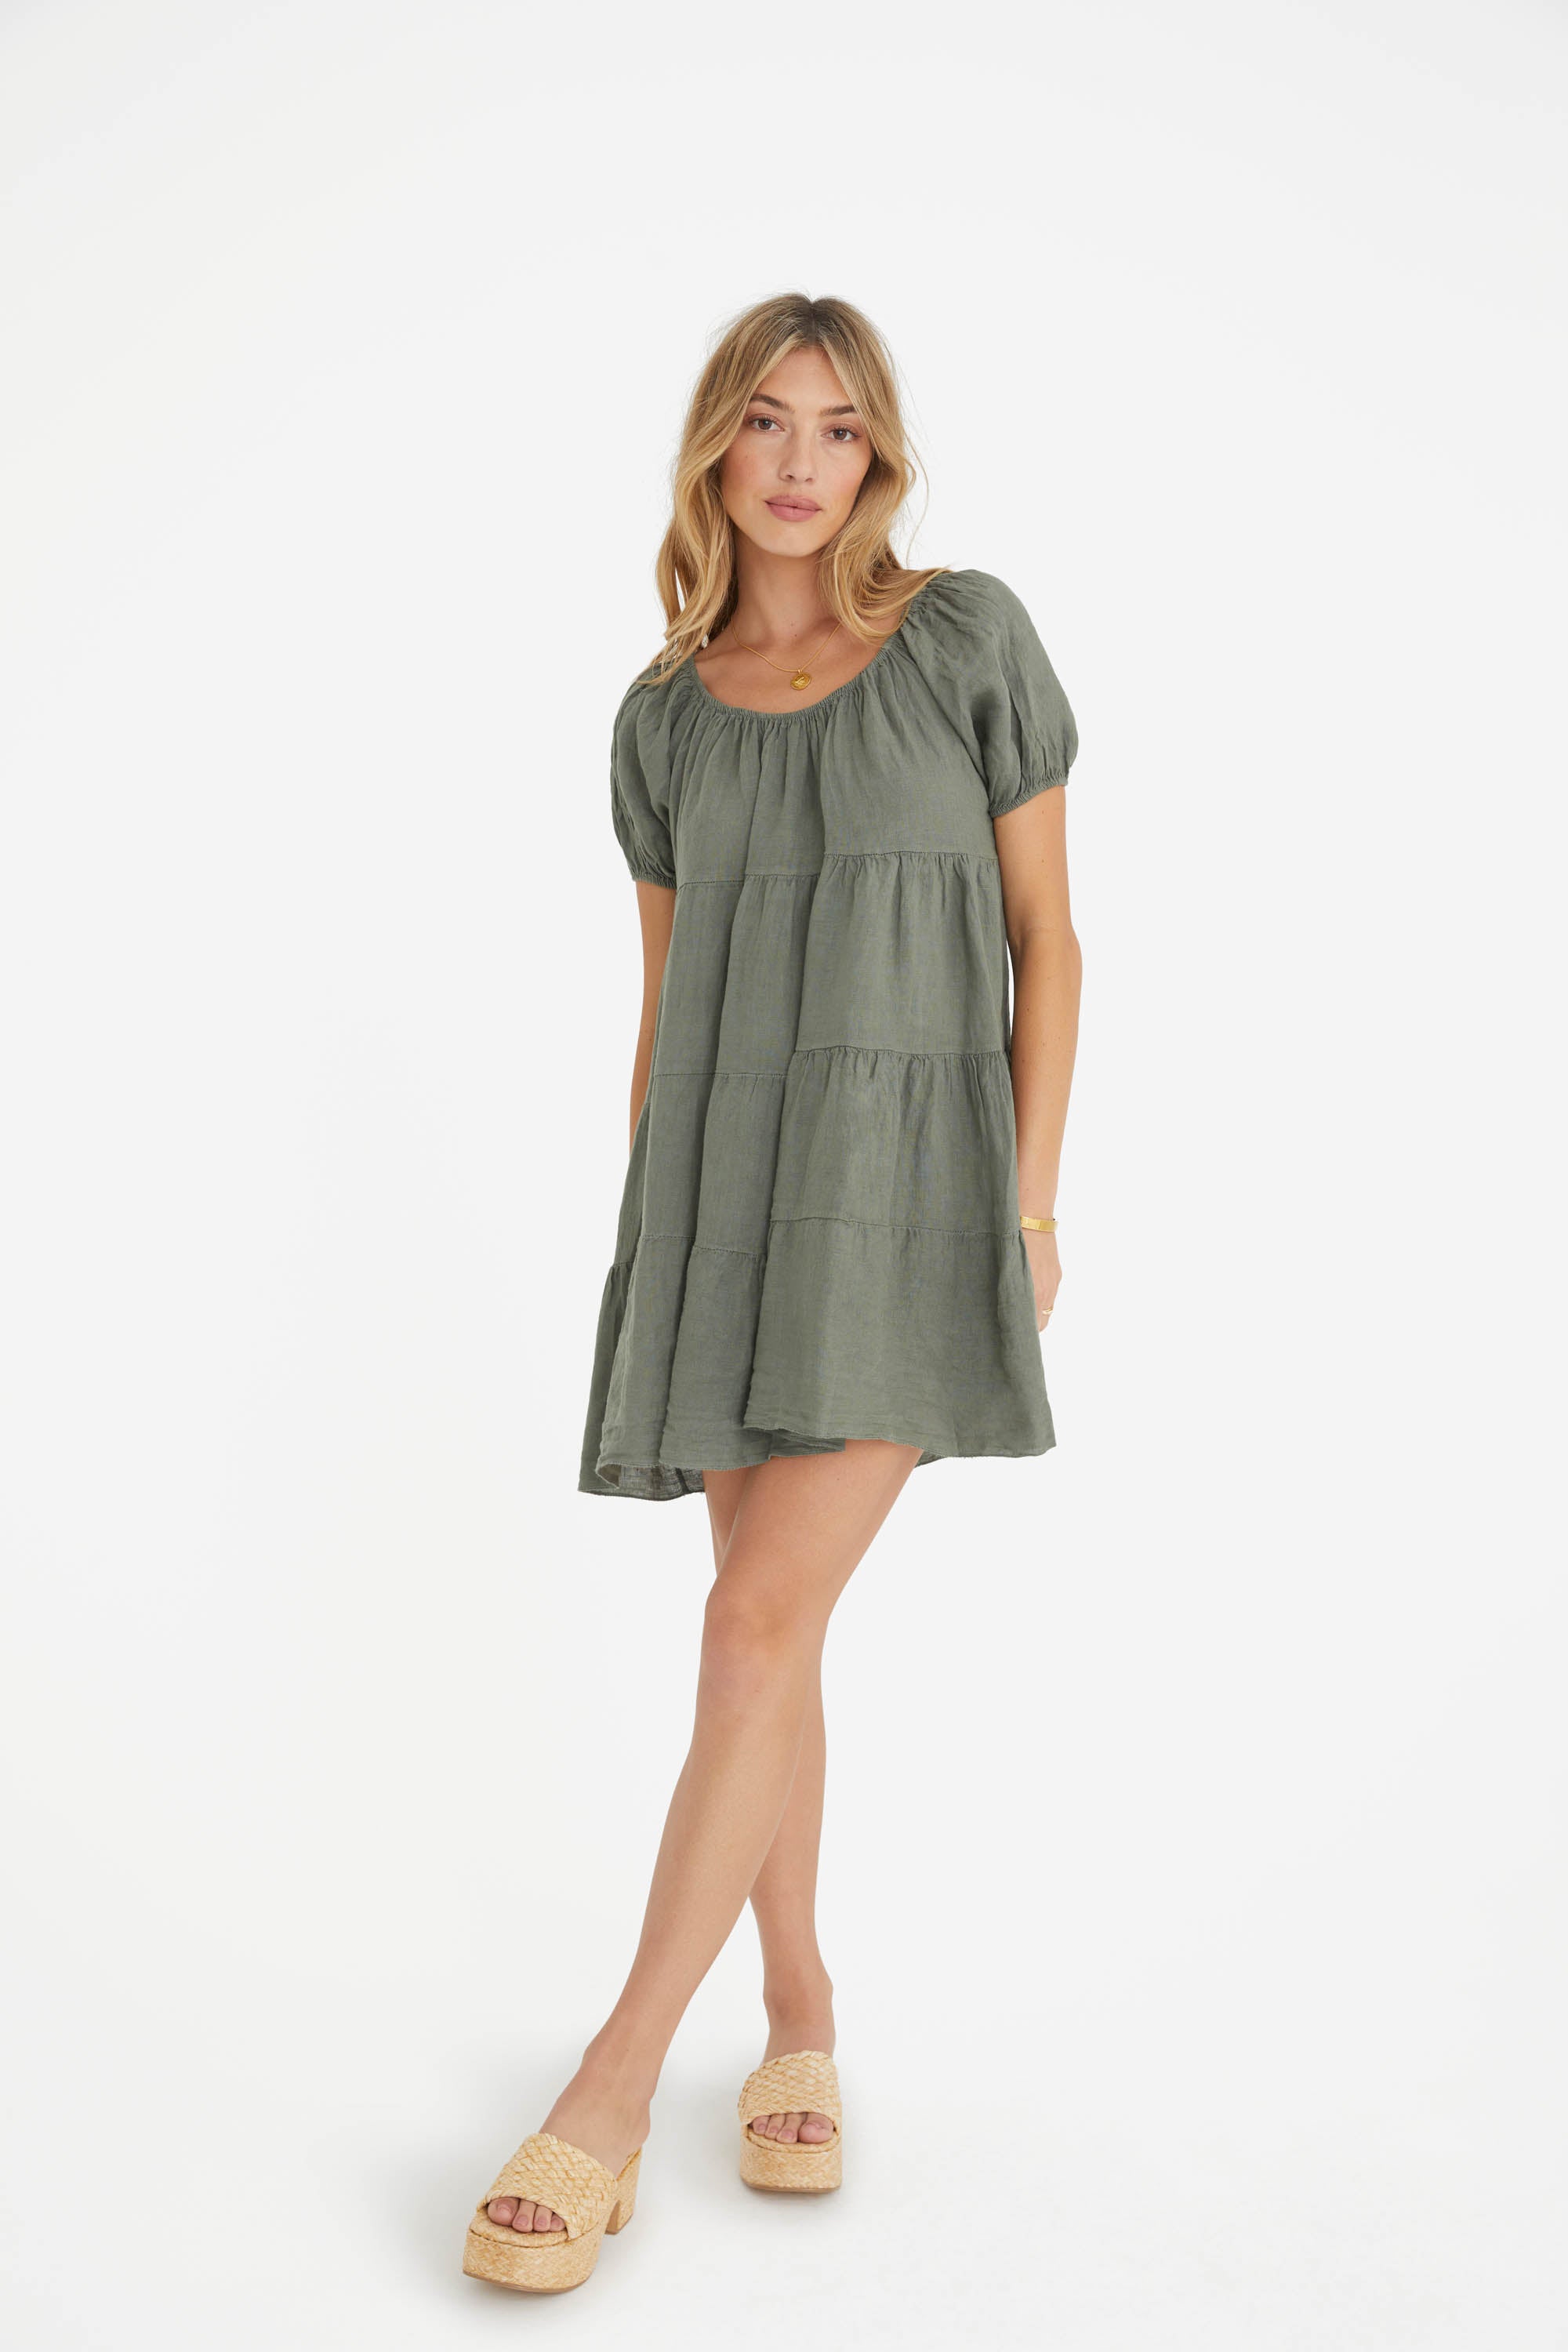 The Sabrina Linen Dress in Olive